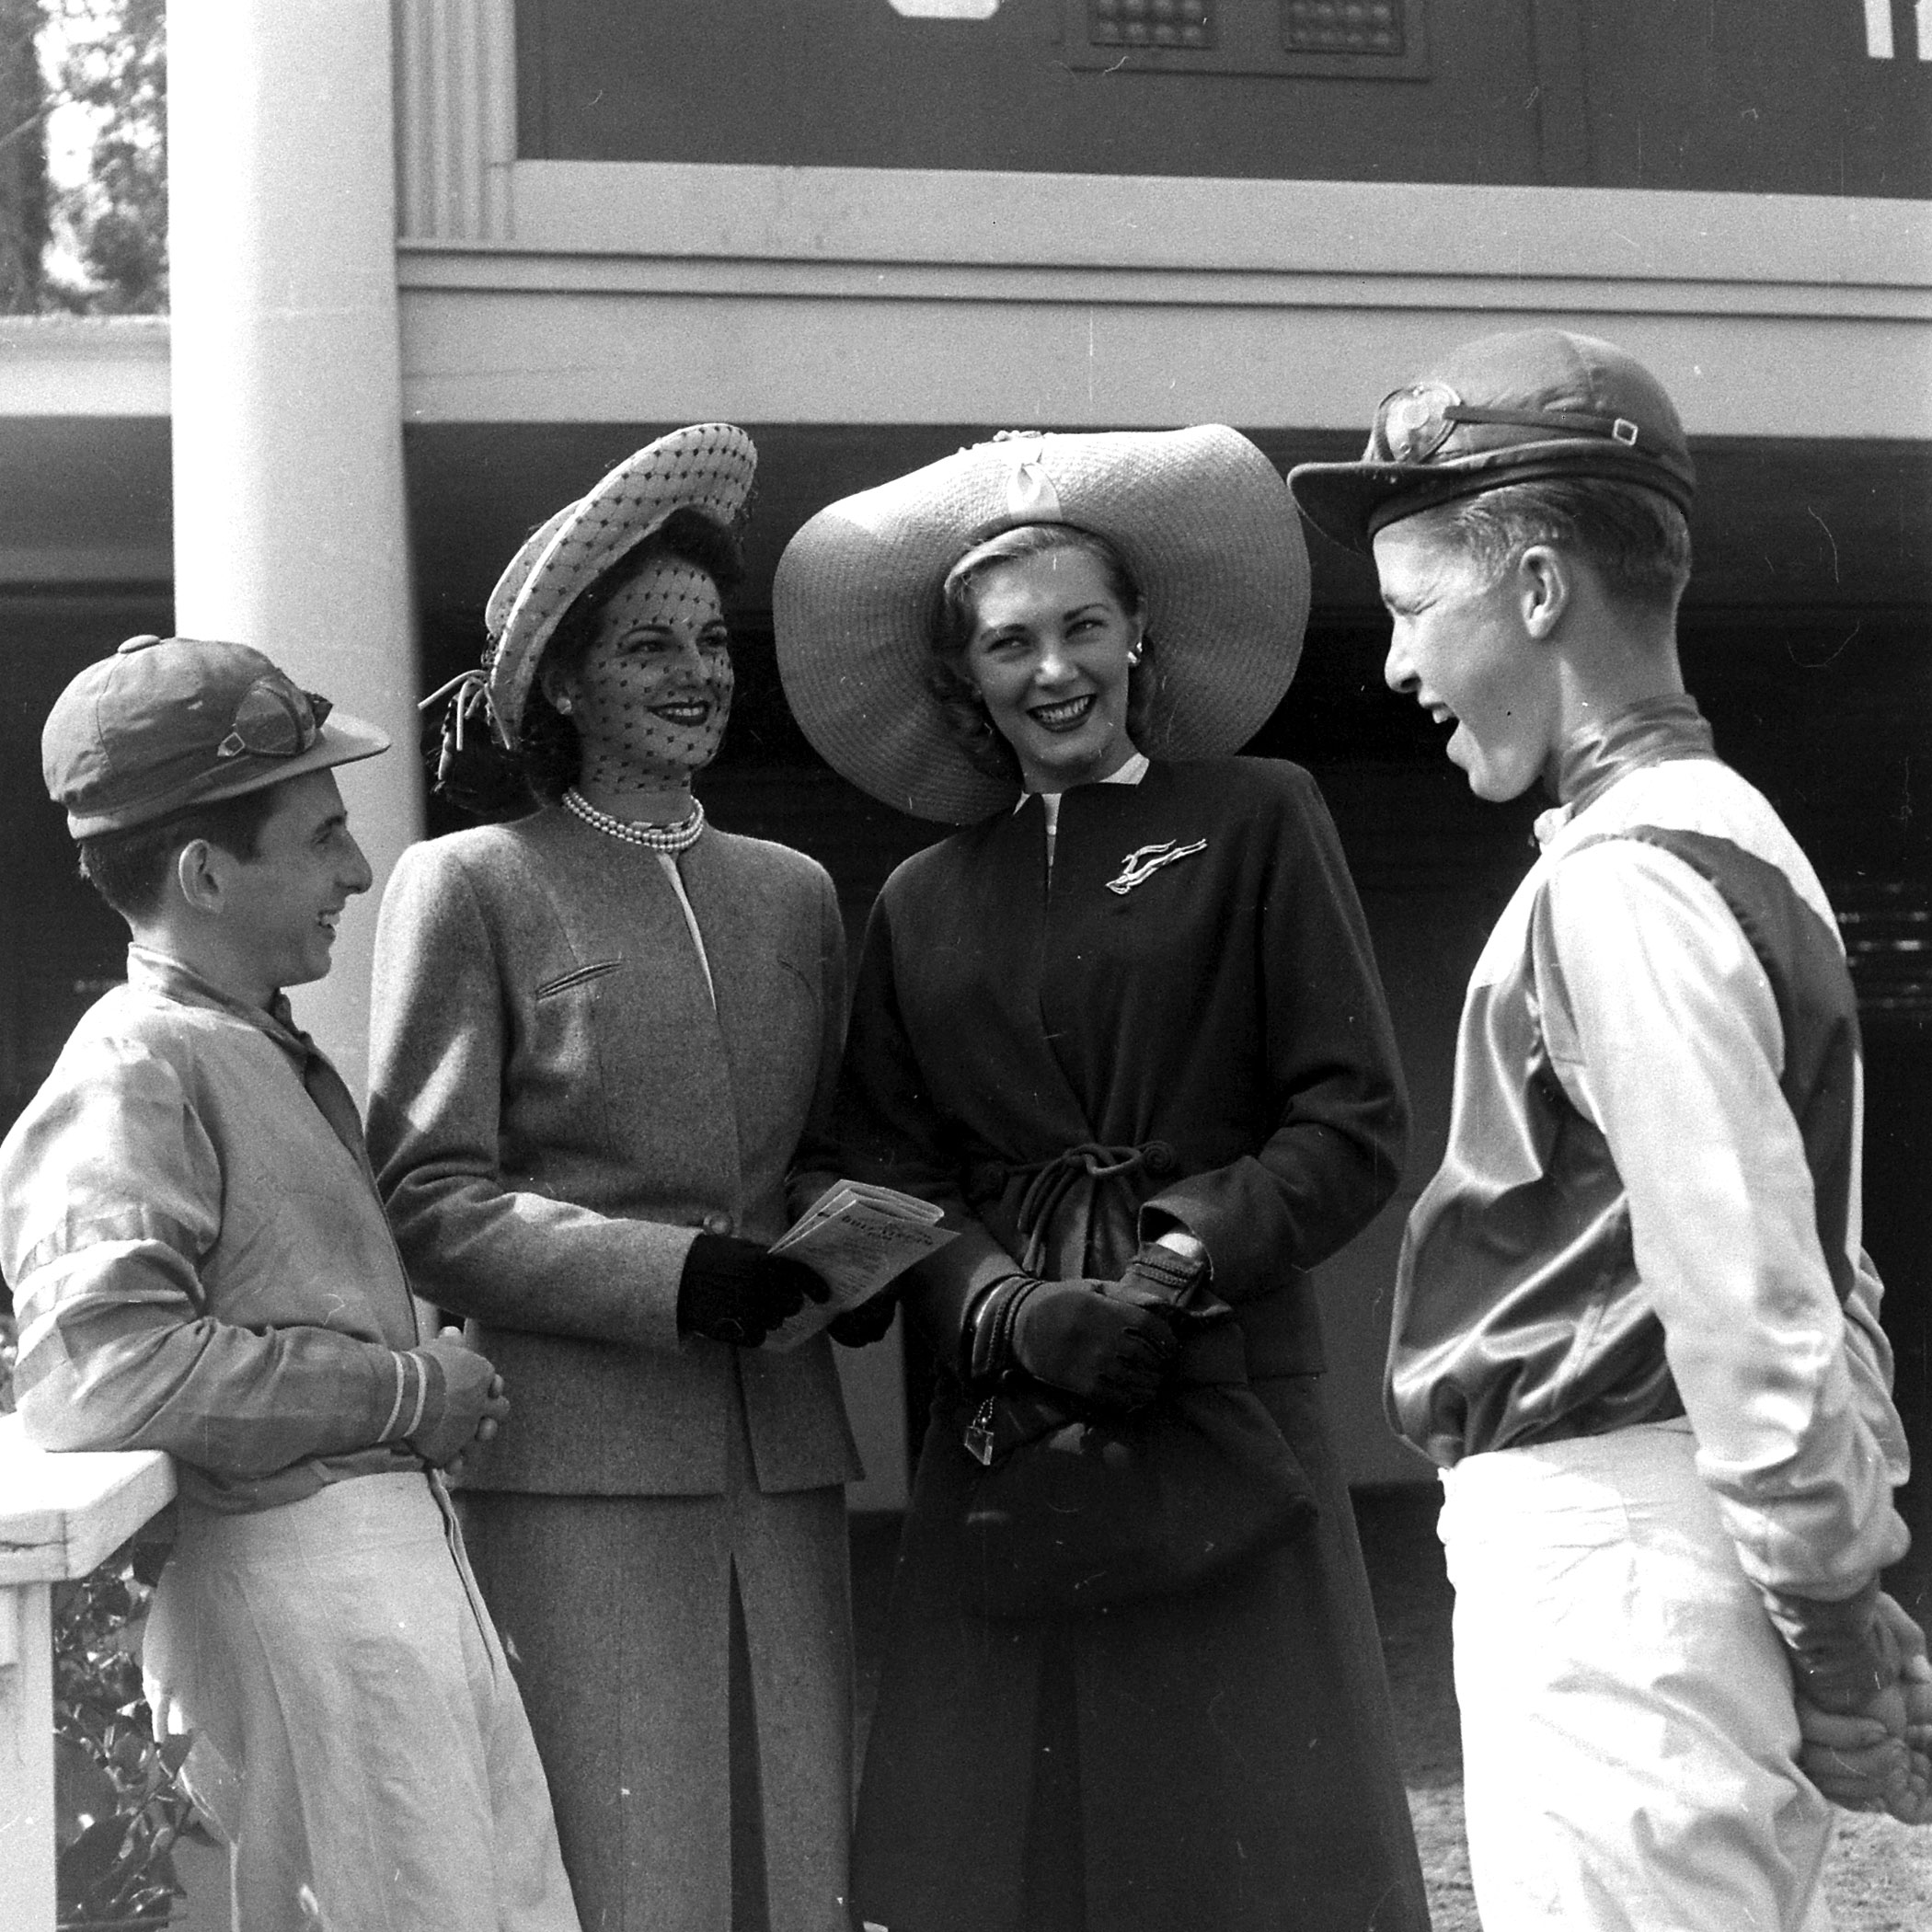 Fashion at the horse races, 1945.